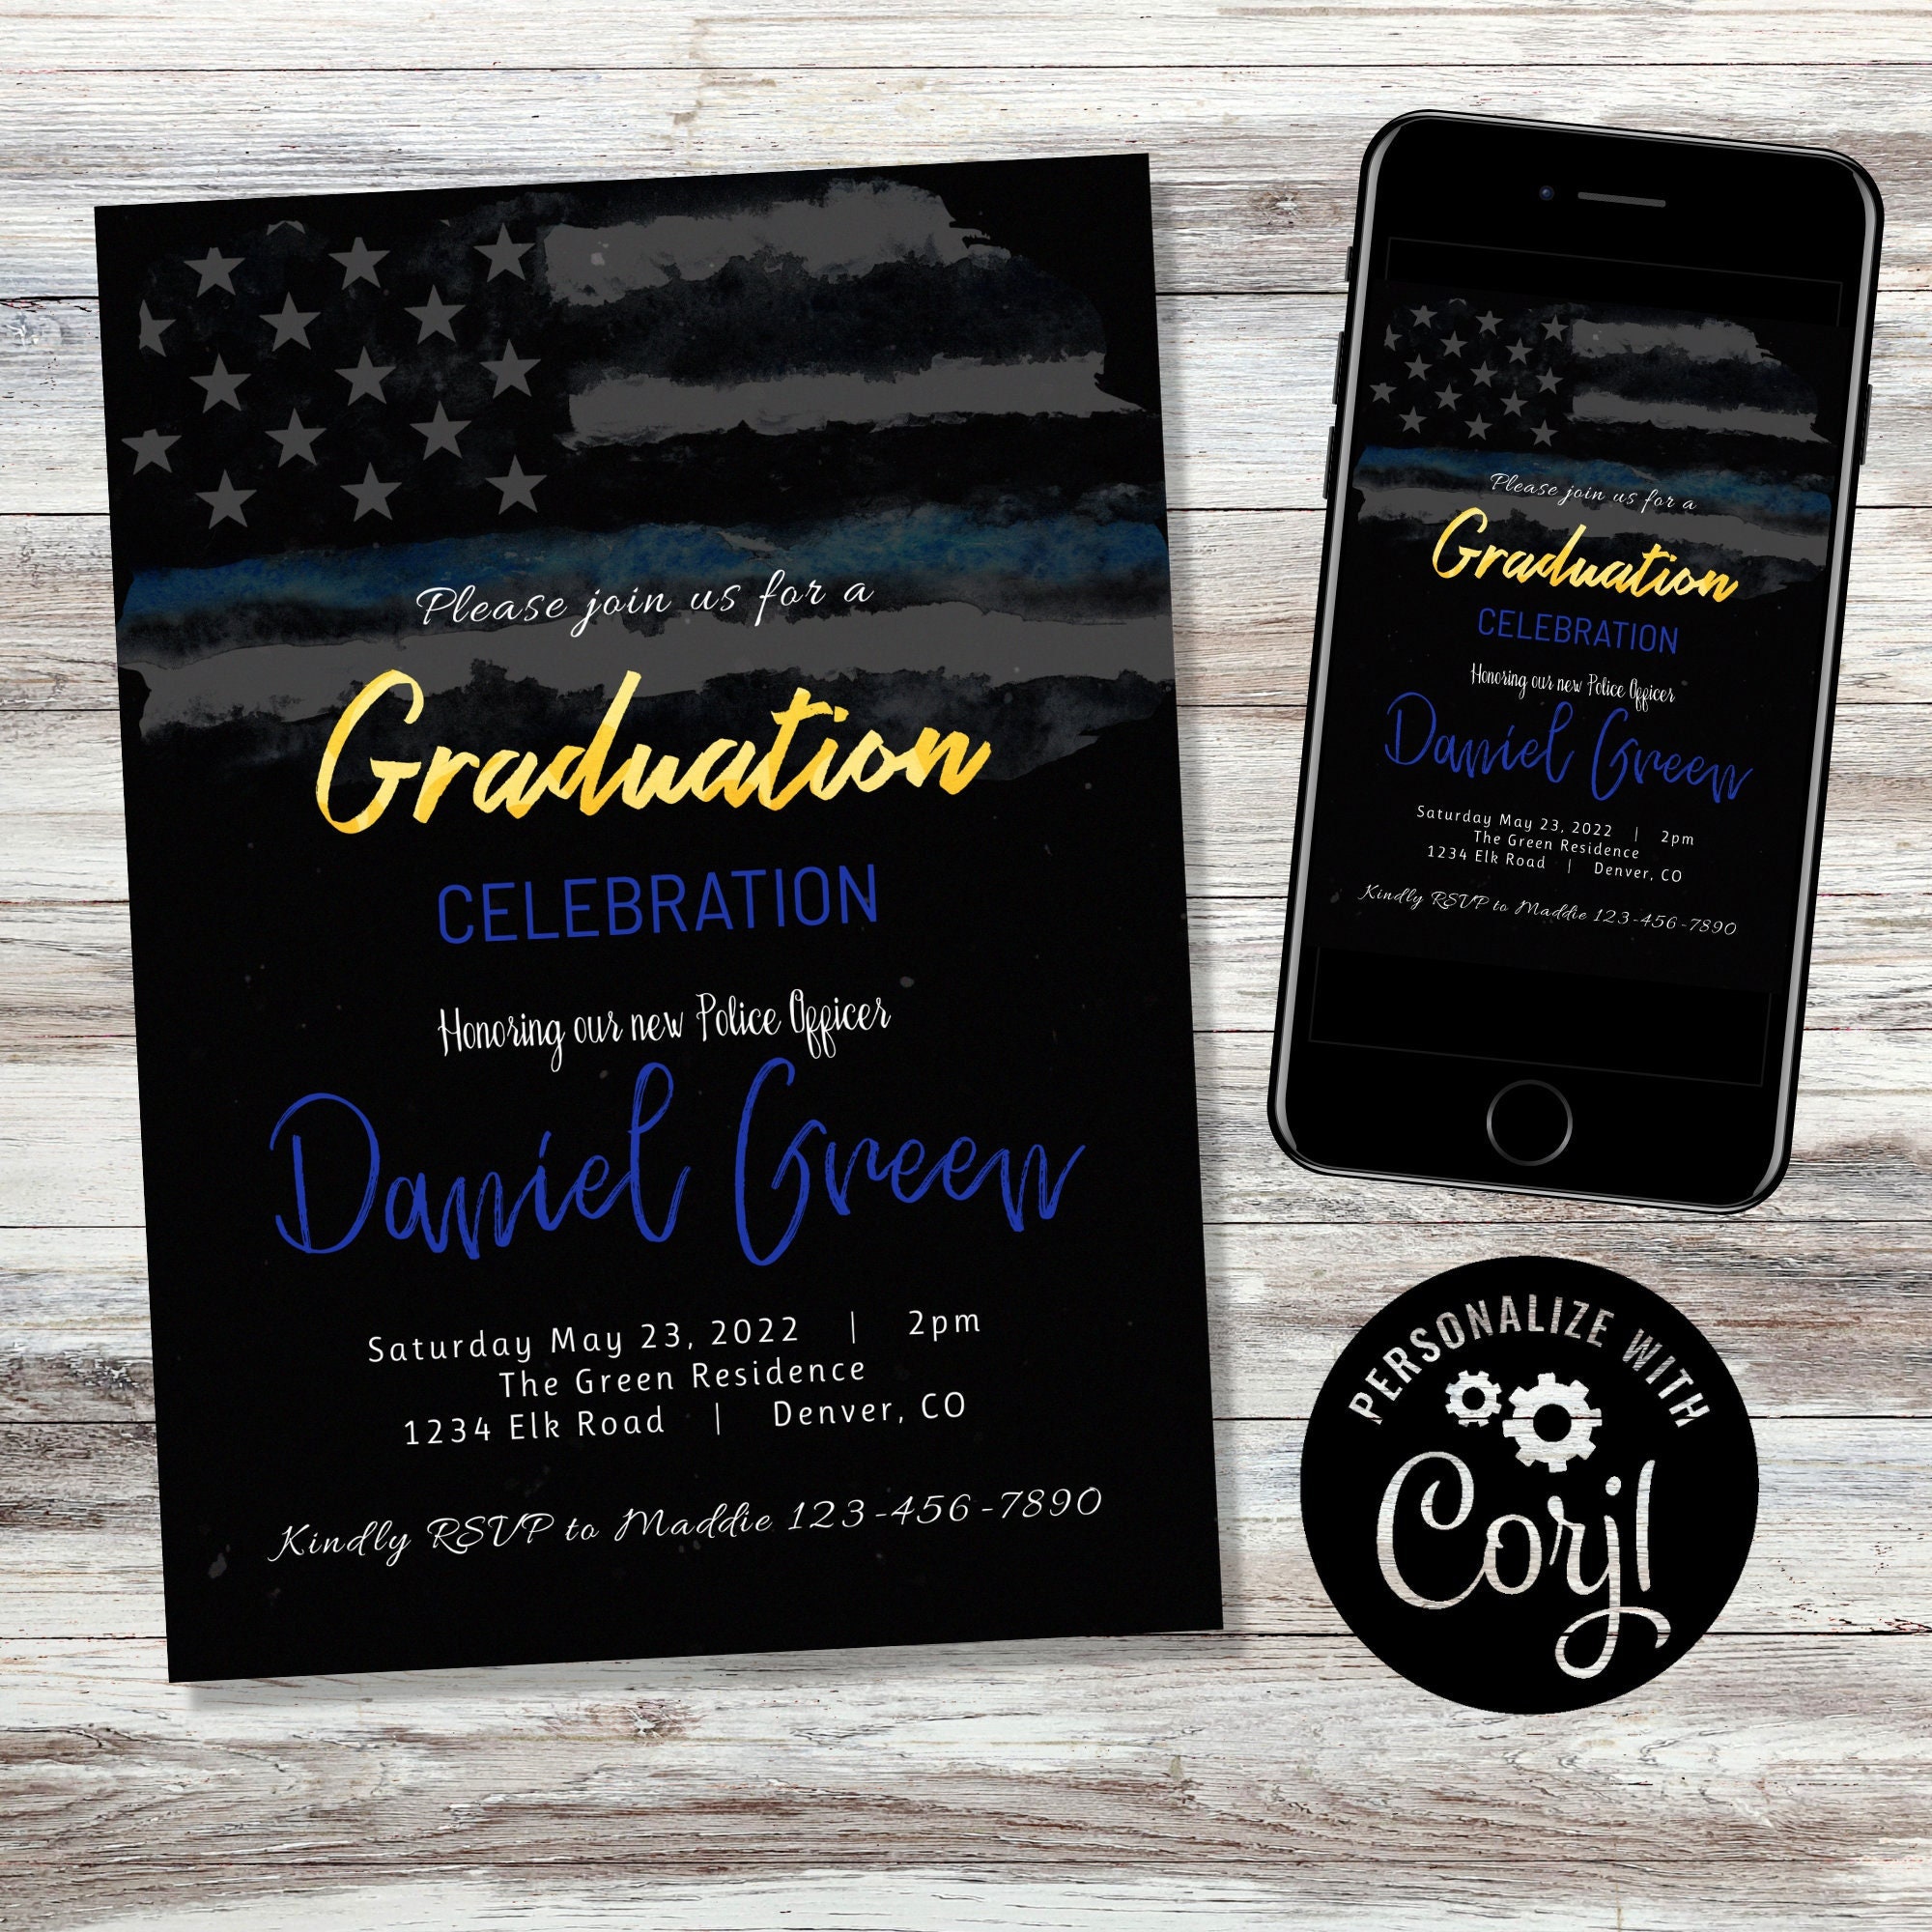 Police Academy Graduation Gifts, Personalized Police Officer Gifts, Cop  Gifts, Gifts for L…